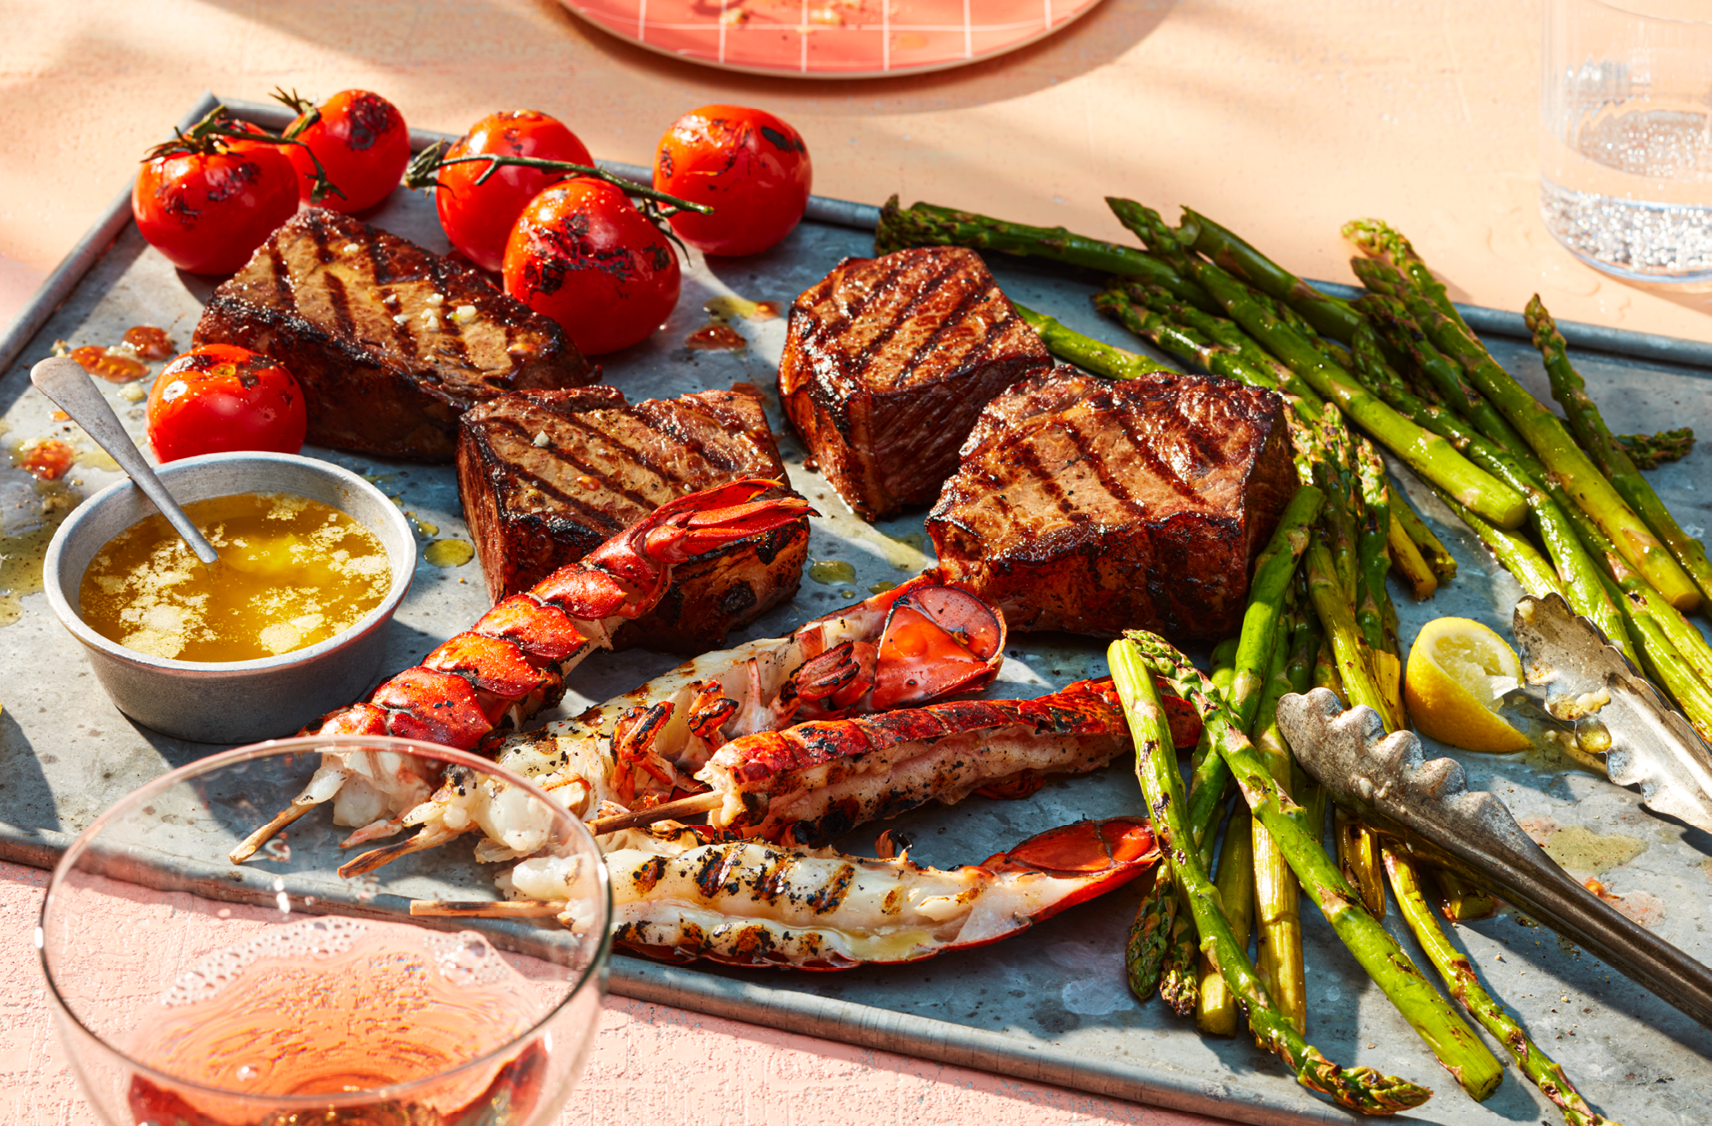 A tray filled with grilled portions of PC Lobster Tail Skewers, striploin steak, blistered tomatoes and asparagus tips